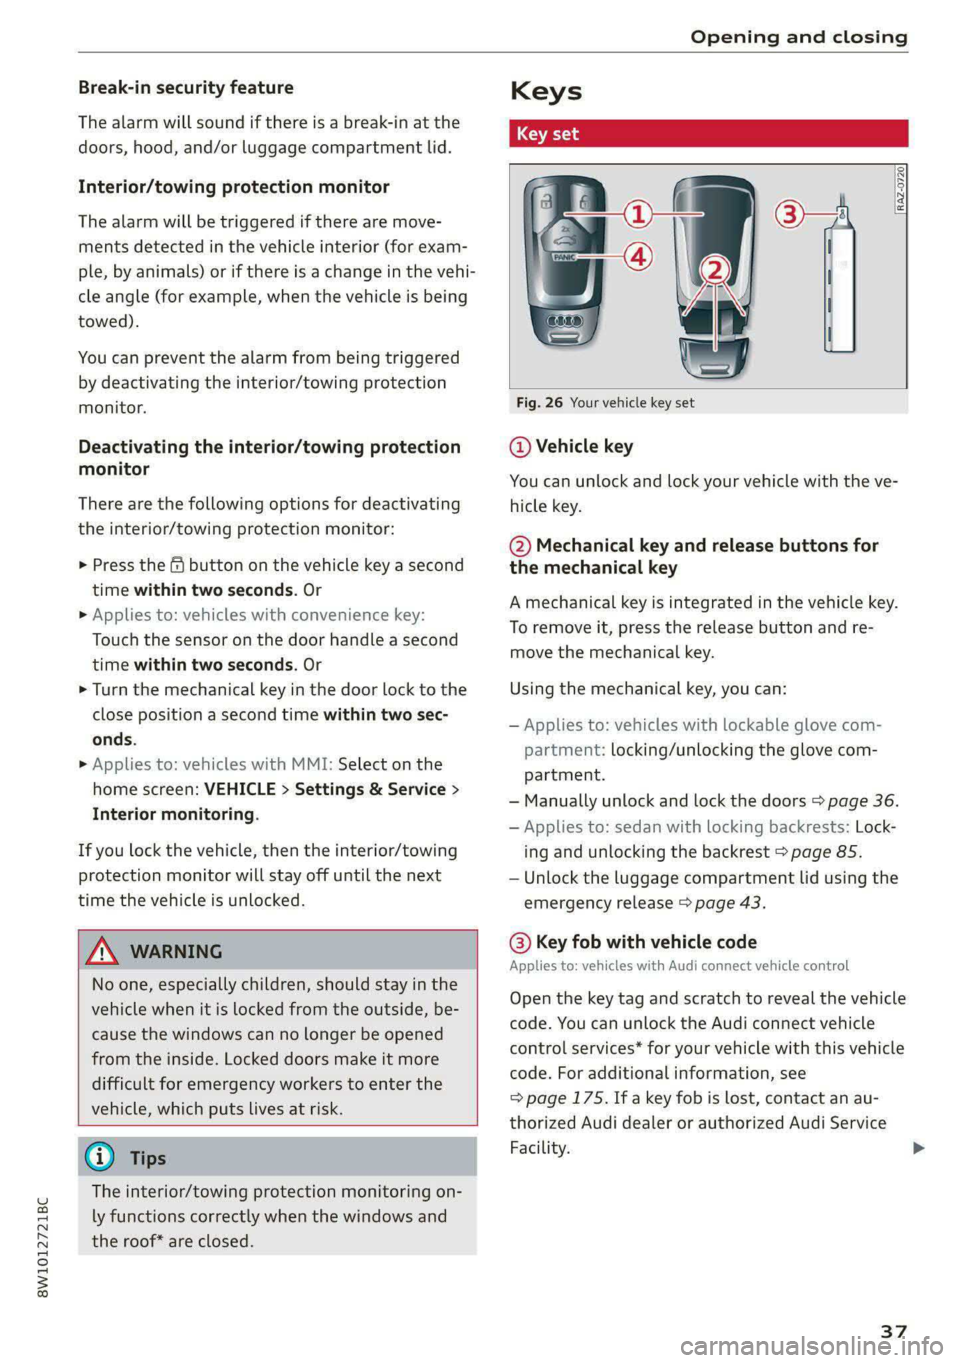 AUDI S4 2021  Owners Manual 8W1012721BC 
Opening and closing 
  
Break-in security feature 
The alarm will sound if there is a break-in at the 
doors, hood, and/or luggage compartment lid. 
Interior/towing protection monitor 
Th